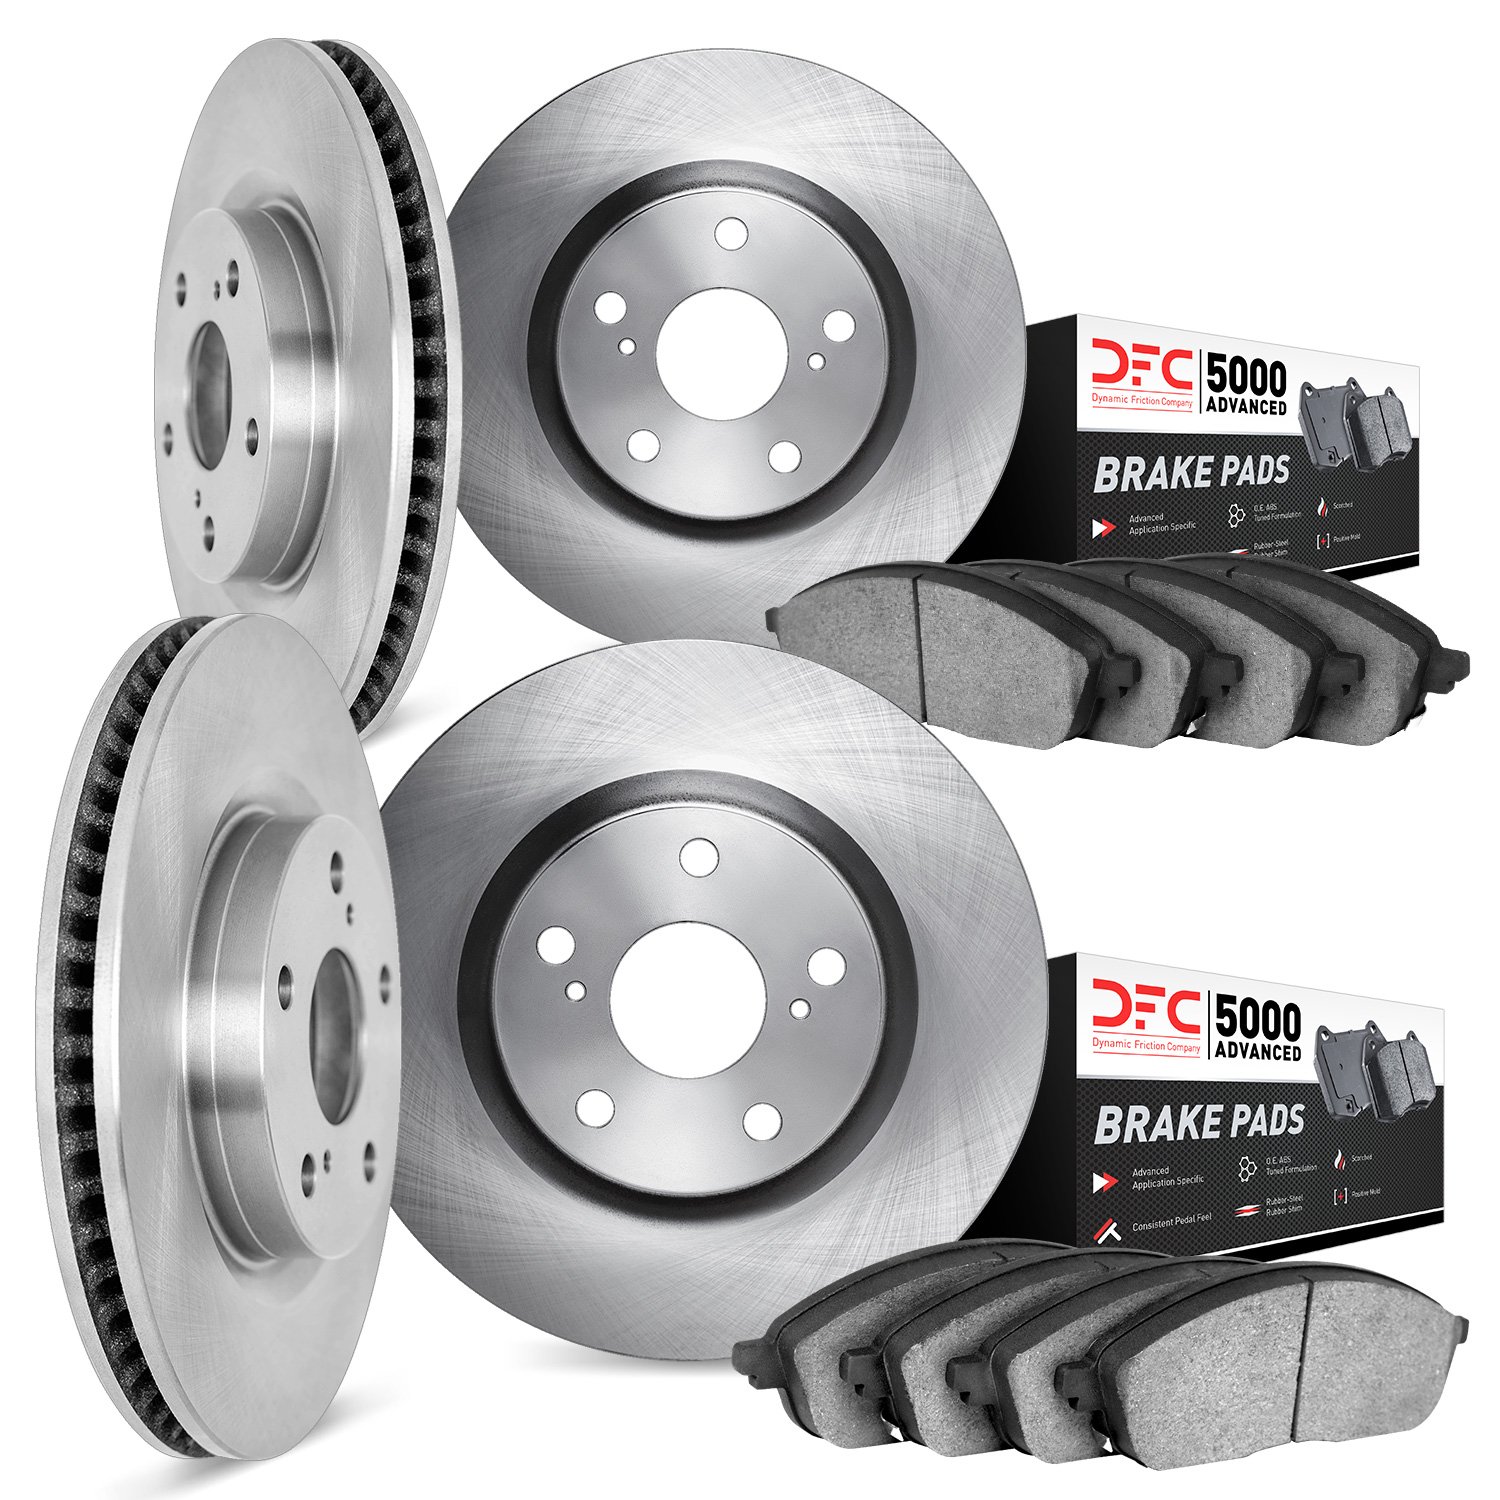 6504-63037 Brake Rotors w/5000 Advanced Brake Pads Kit, 2019-2019 Mercedes-Benz, Position: Front and Rear